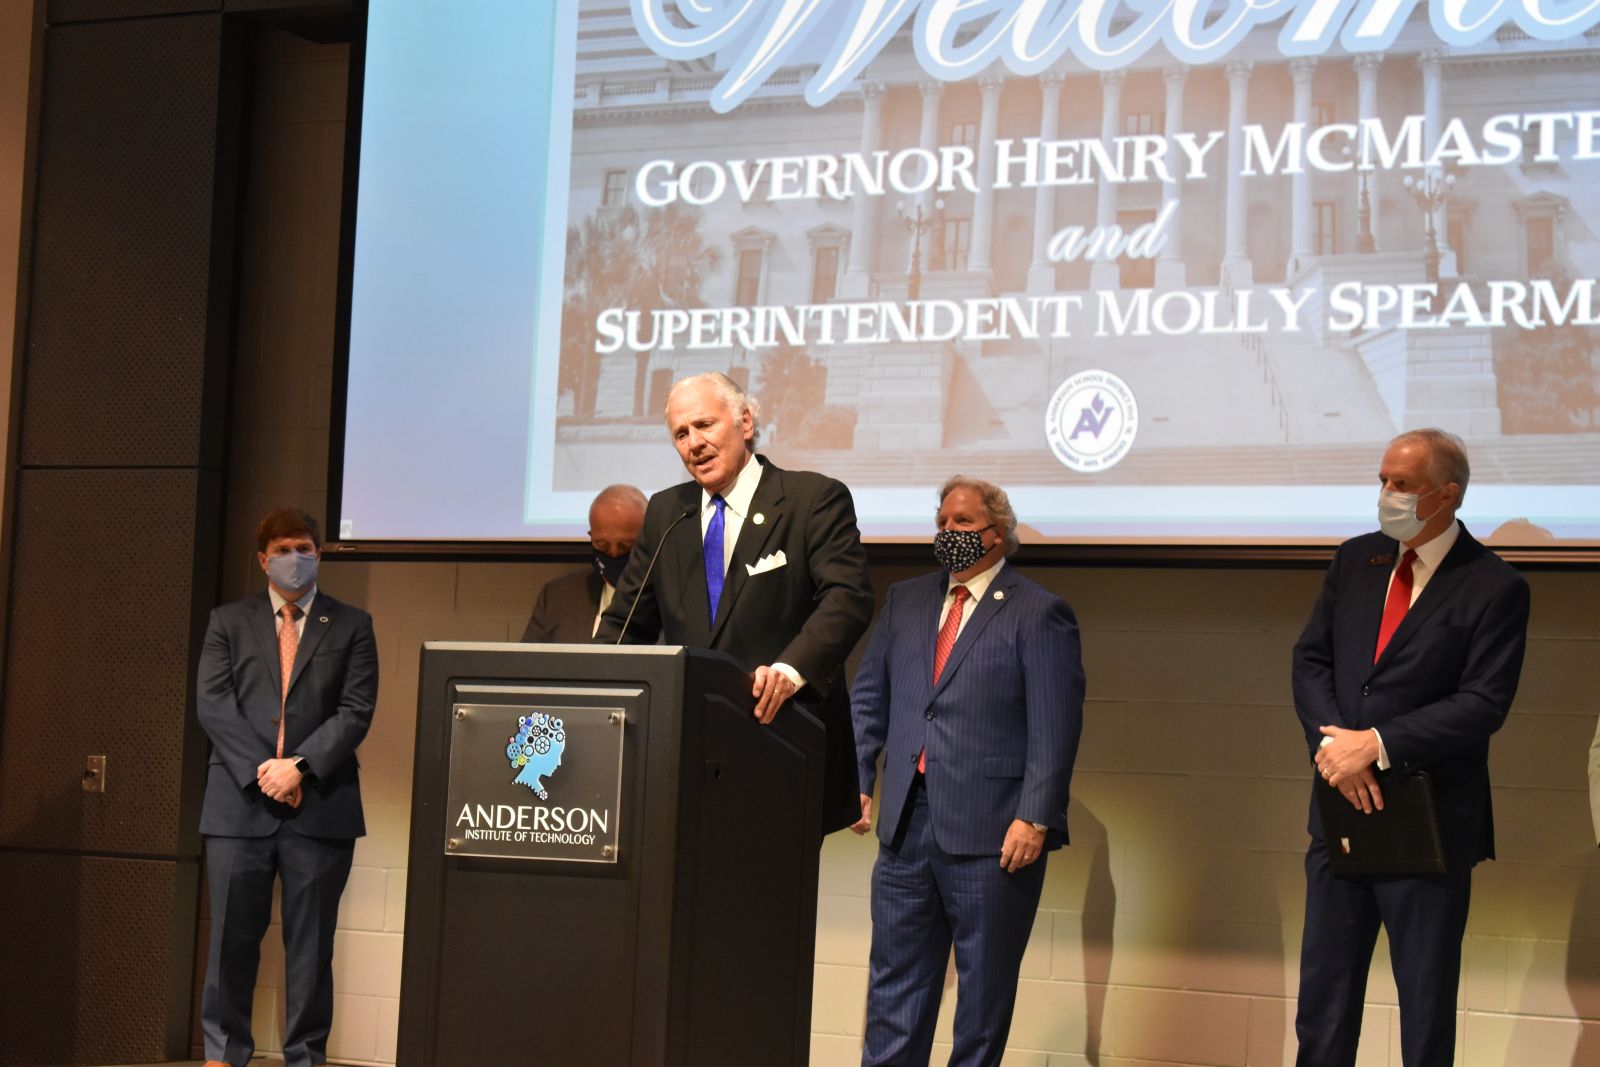 The Anderson Institute of Technology was Gov. Henry McMaster's first stop in a tour across the state announcing PPE distributed to schools. (Photo/Molly Hulsey)